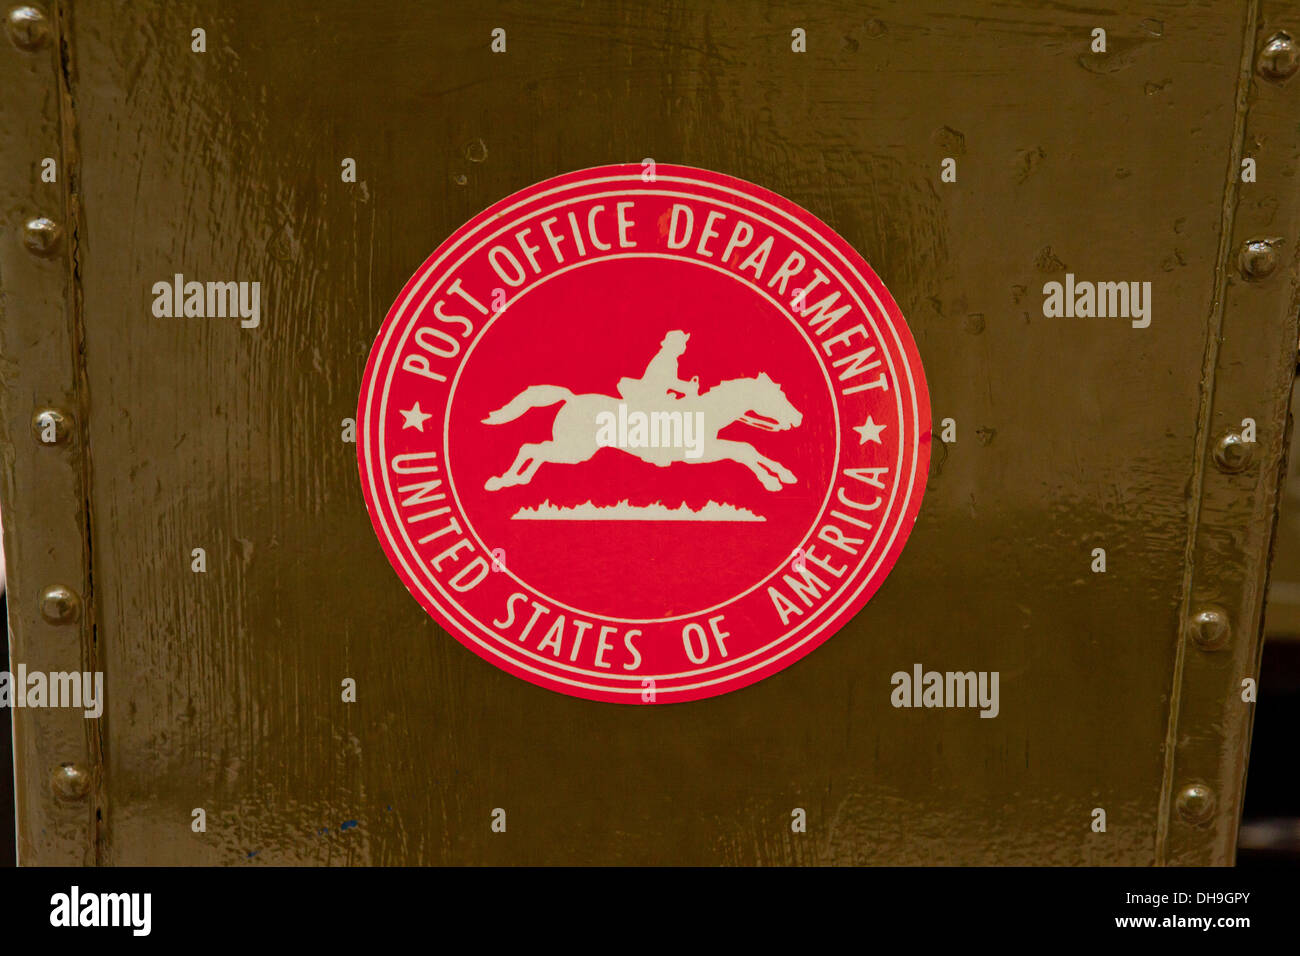 Vintage US Post Office Department seal Stock Photo